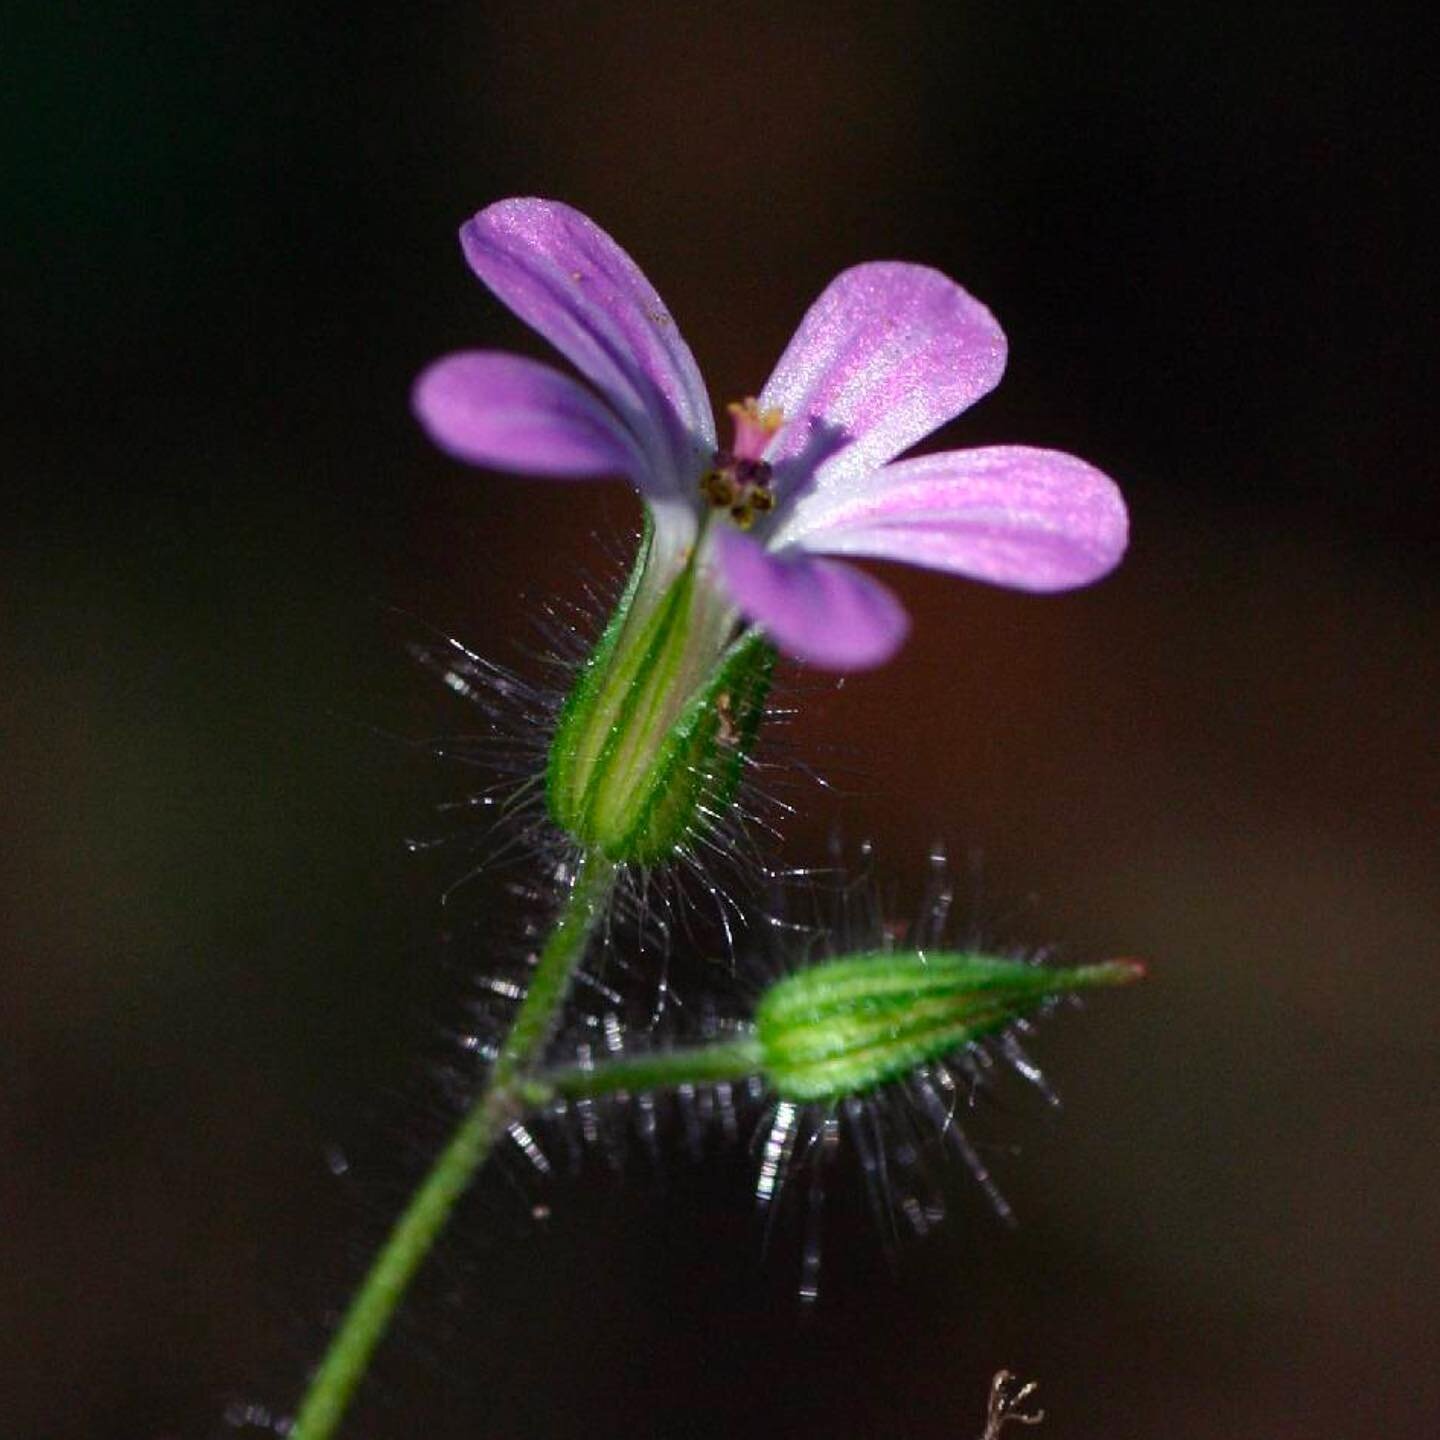 This common and unassuming species of cranesbill has a surprisingly complex picture as a homeopathic. In GERANIUM ROBERTIANUM we find a distinctly PROTECTIVE remedy for the individual whose myriad of symptoms arise from a deep sense of VULNERABILITY 